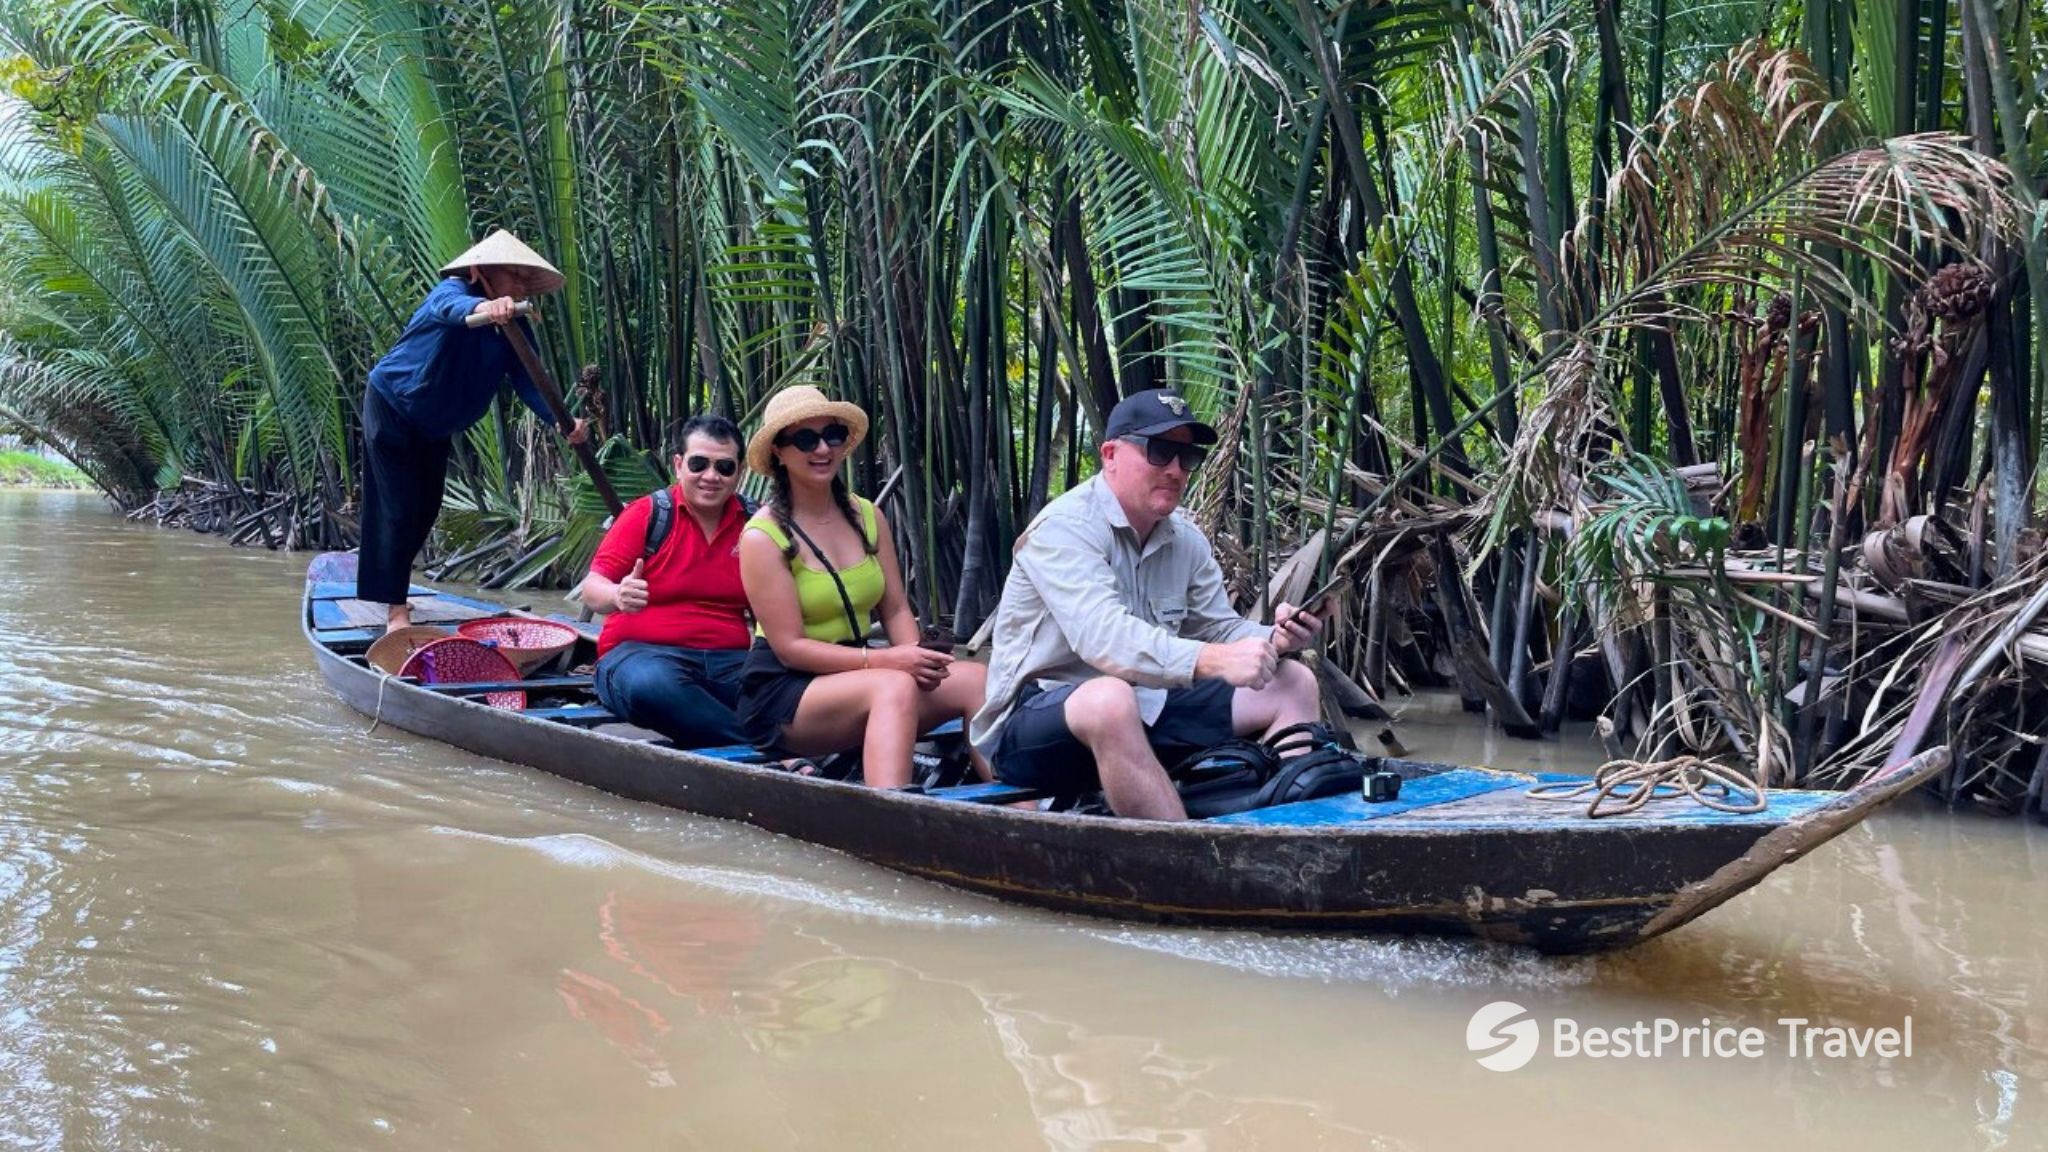 Day 12 Drive The Small Sampan Boat Through Small Canals In Mekong